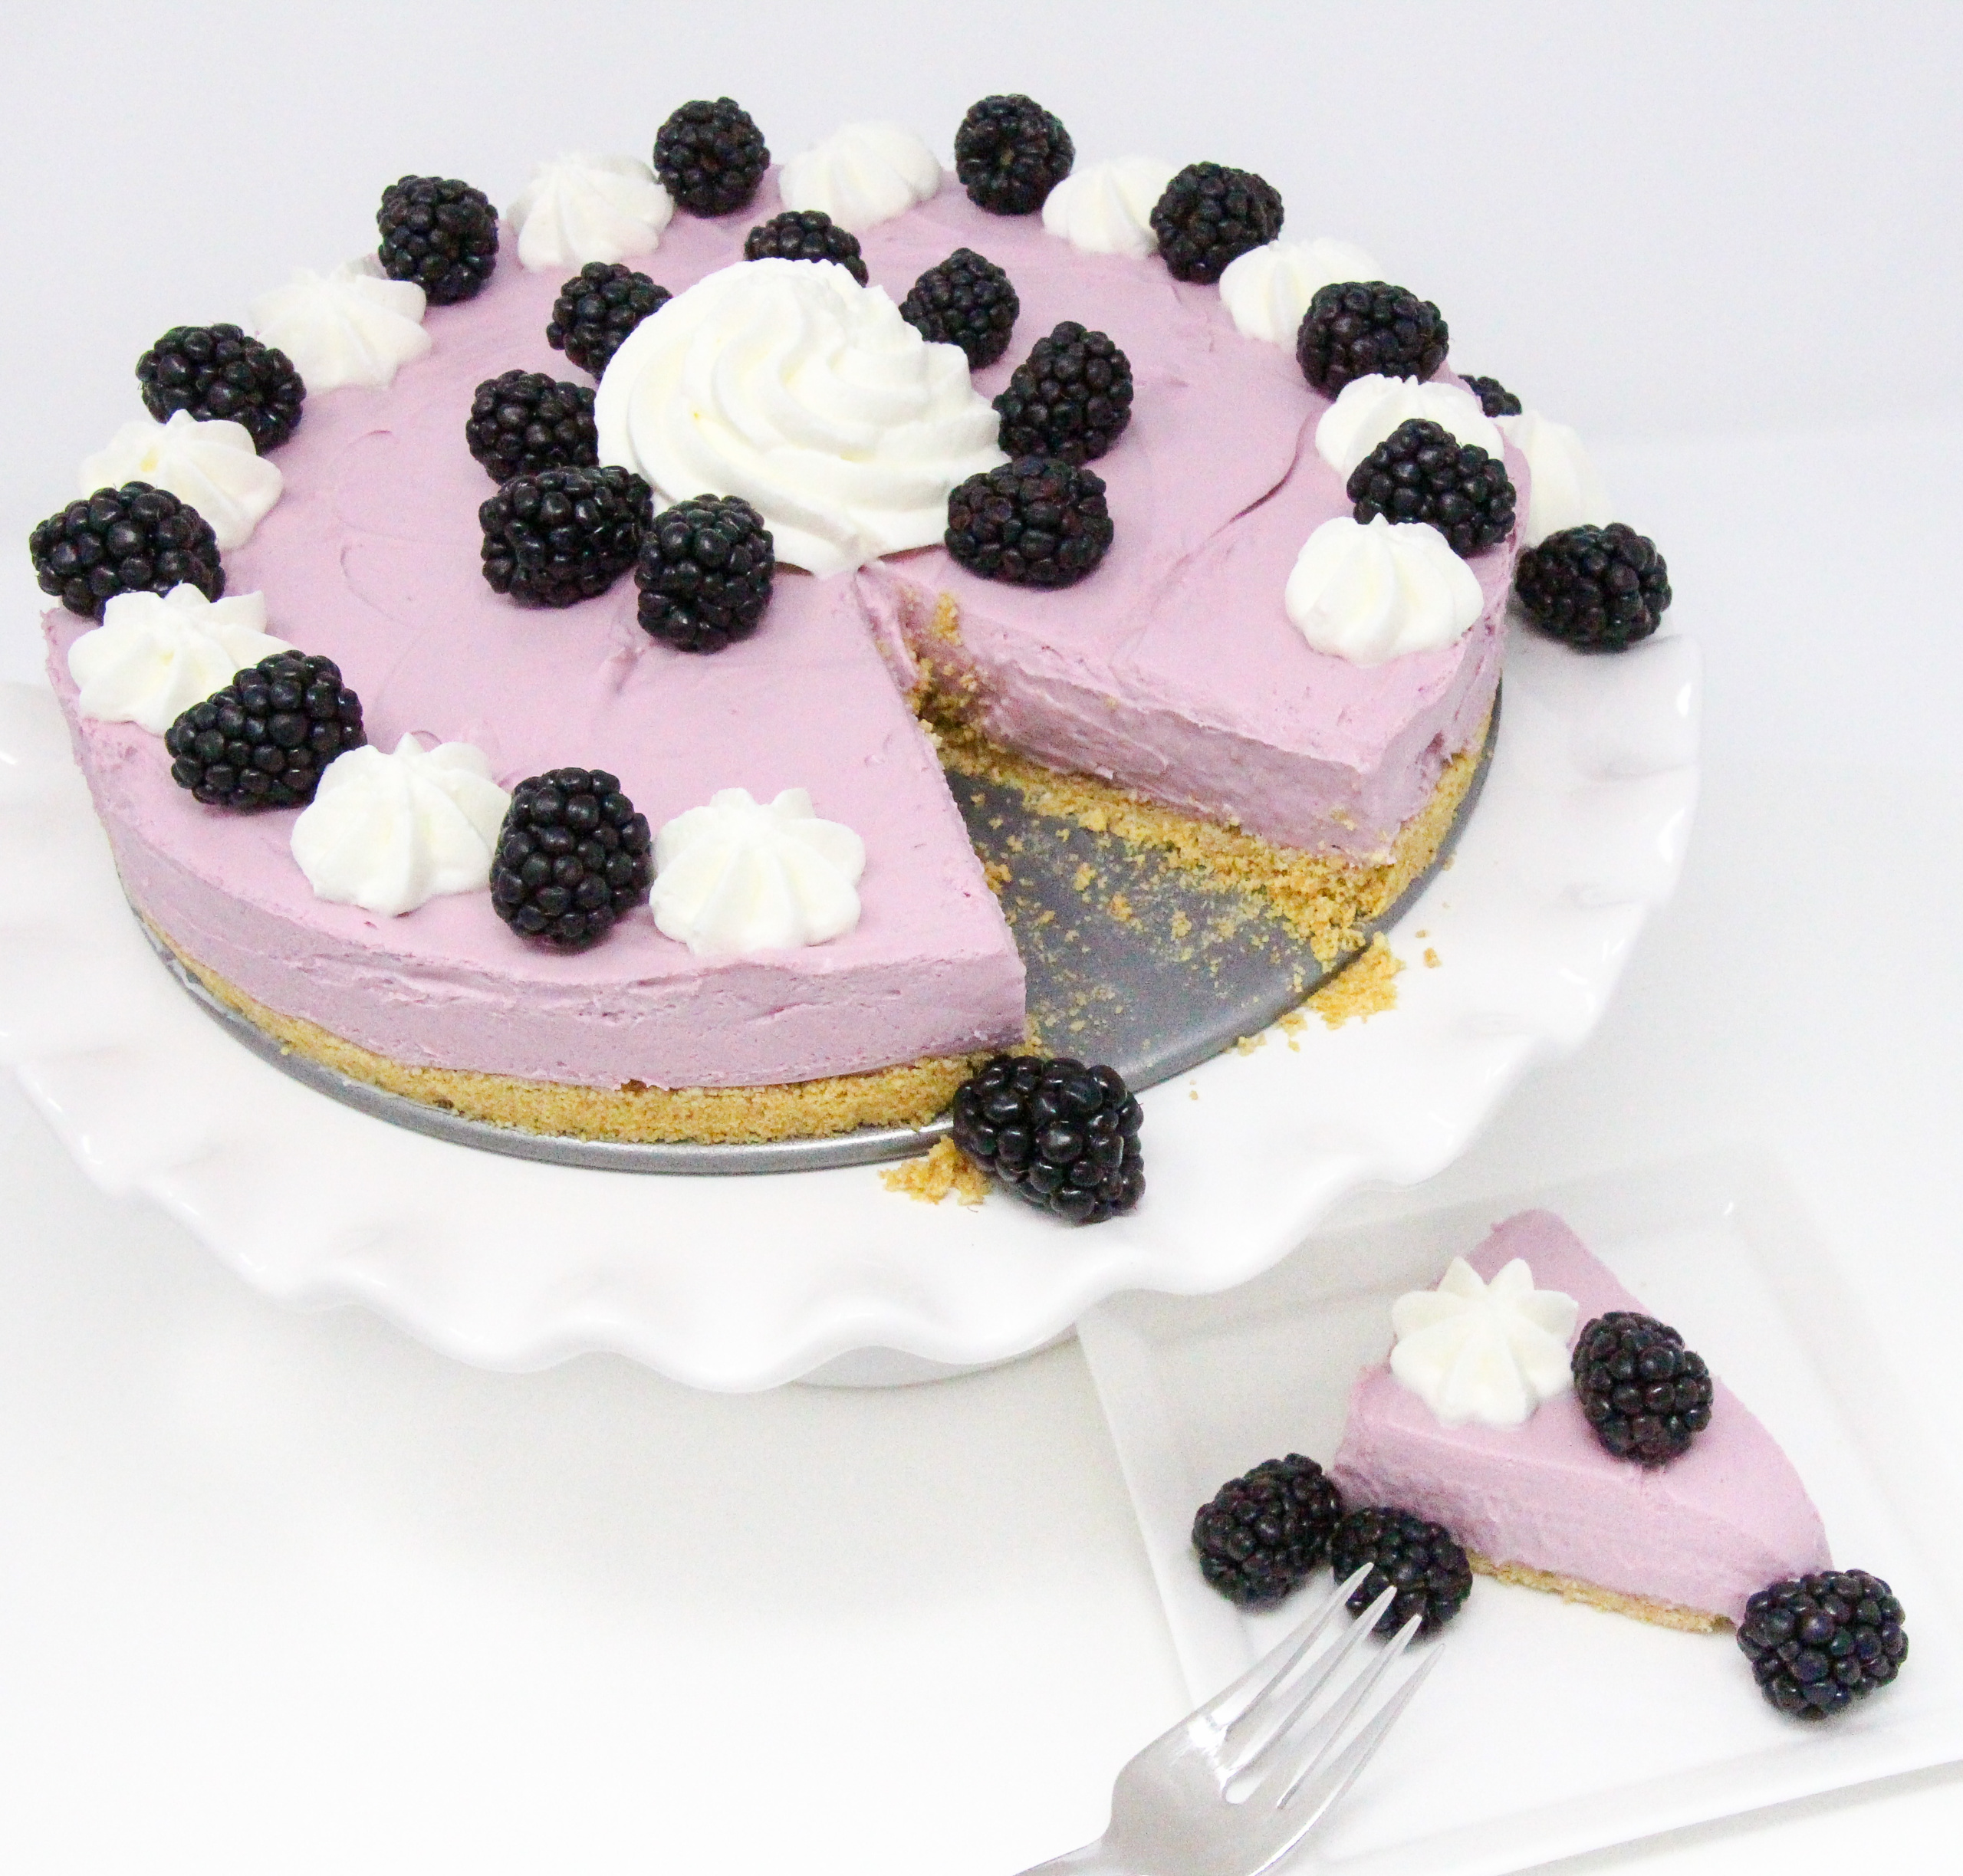 Perfect for hot summer weather, Blackberry No-Bake Cheesecake has a creamy, rich flavor without turning on the oven! Recipe shared with permission granted by Krista Davis, author of THE DIVA SAYS CHEESECAKE. 